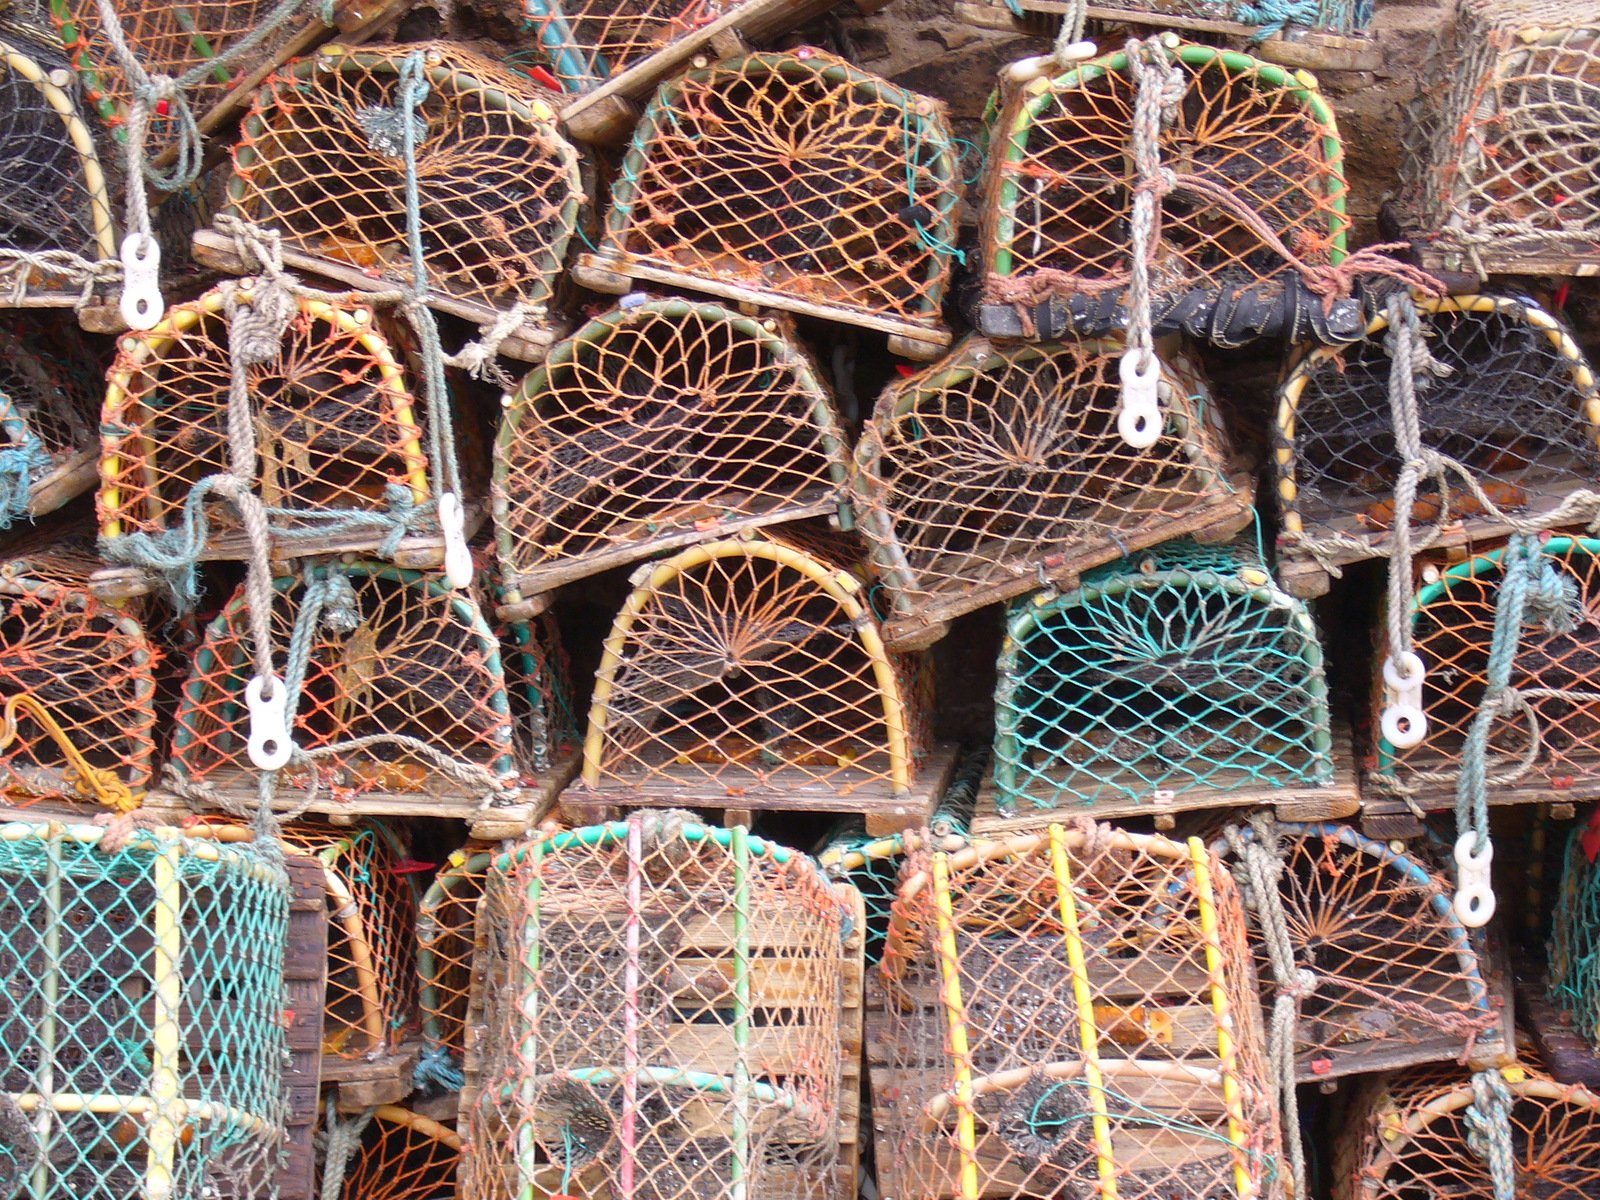 a bunch of cages are piled in a pile